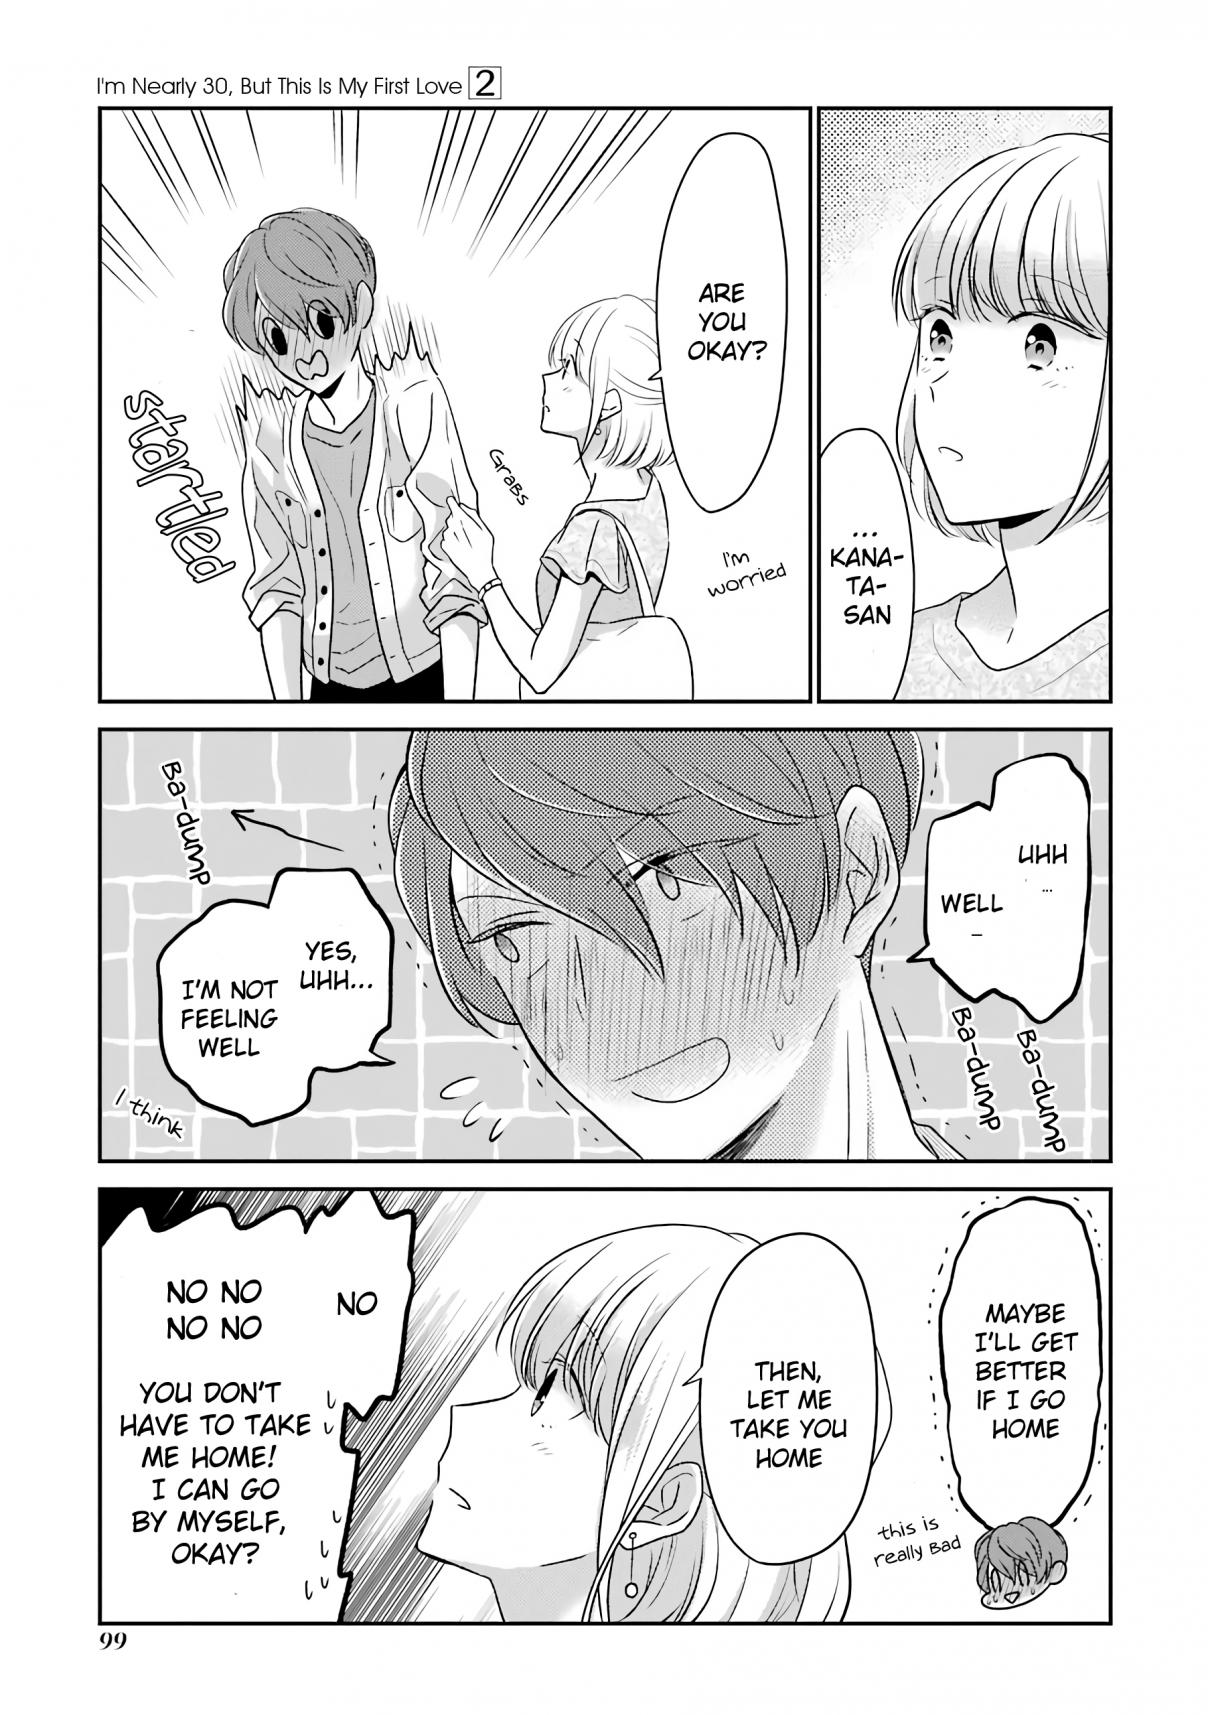 I'm Nearly 30, But This Is My First Love Vol. 2 Ch. 18